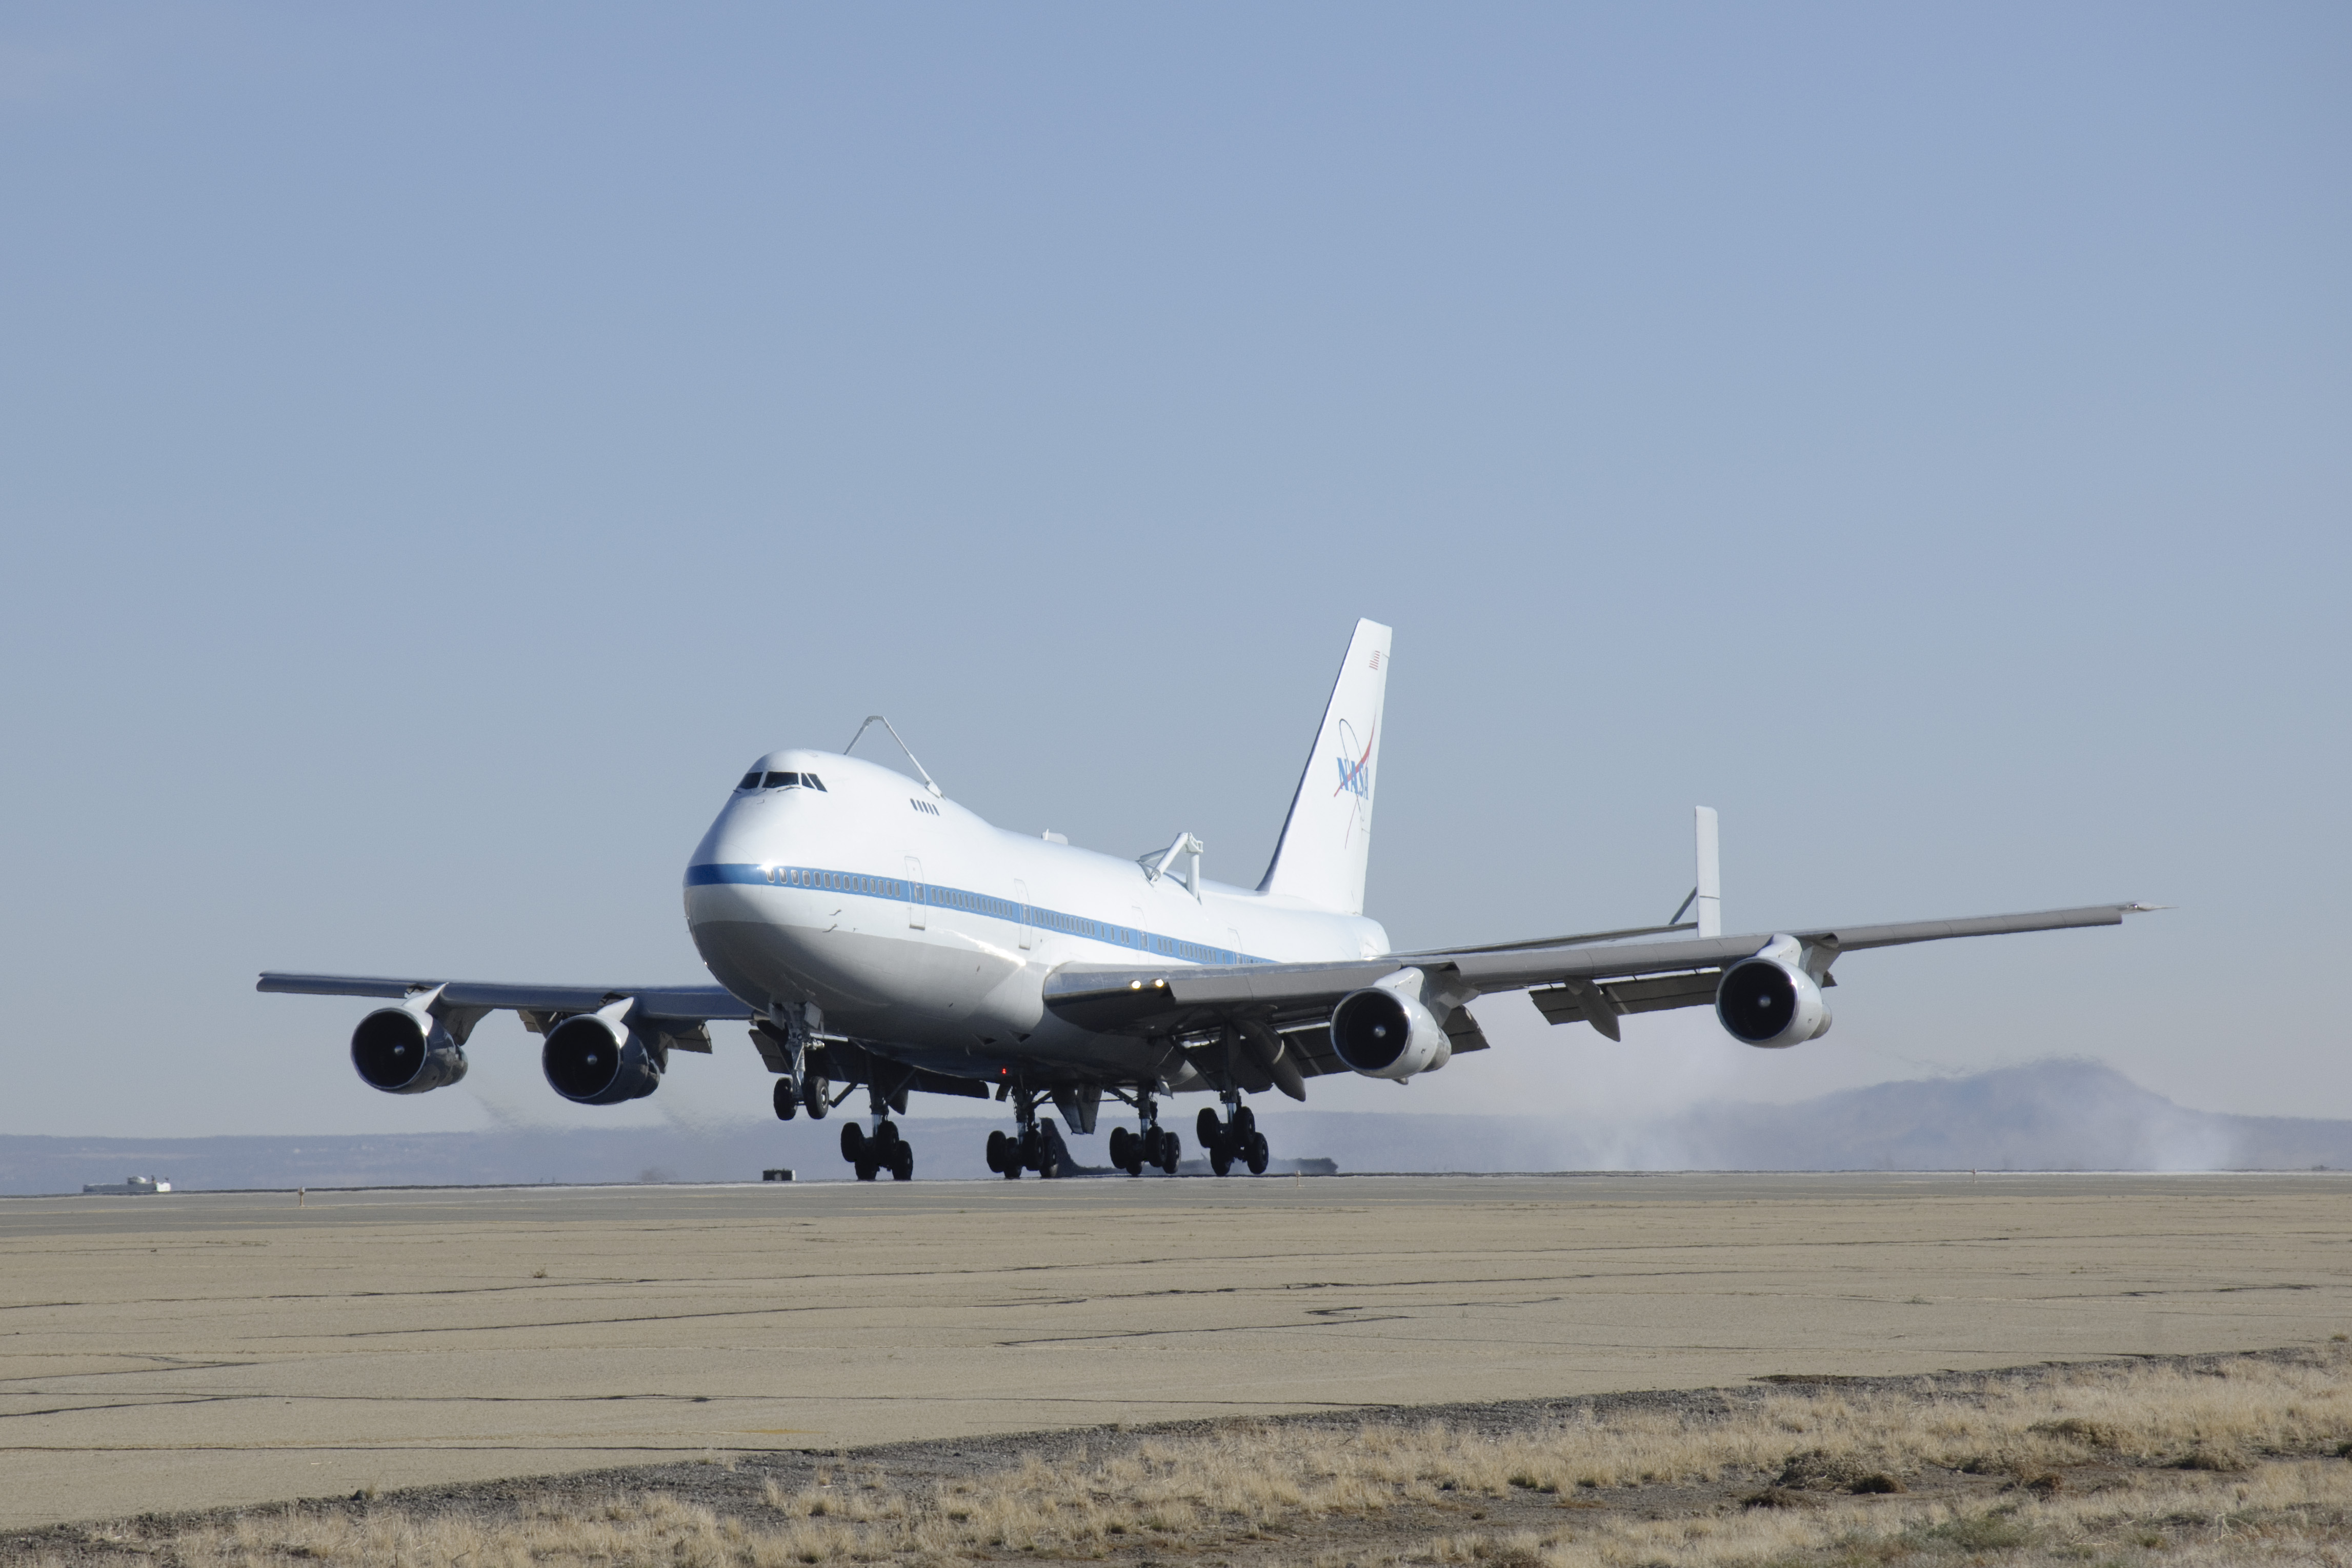 Boeing 747-100SR, N911NA, NASA 911, Space Shuttle Carrier makes its last landing, at Air Force Plant 42, Palmdale, California, 8 February 2012. (NASA)